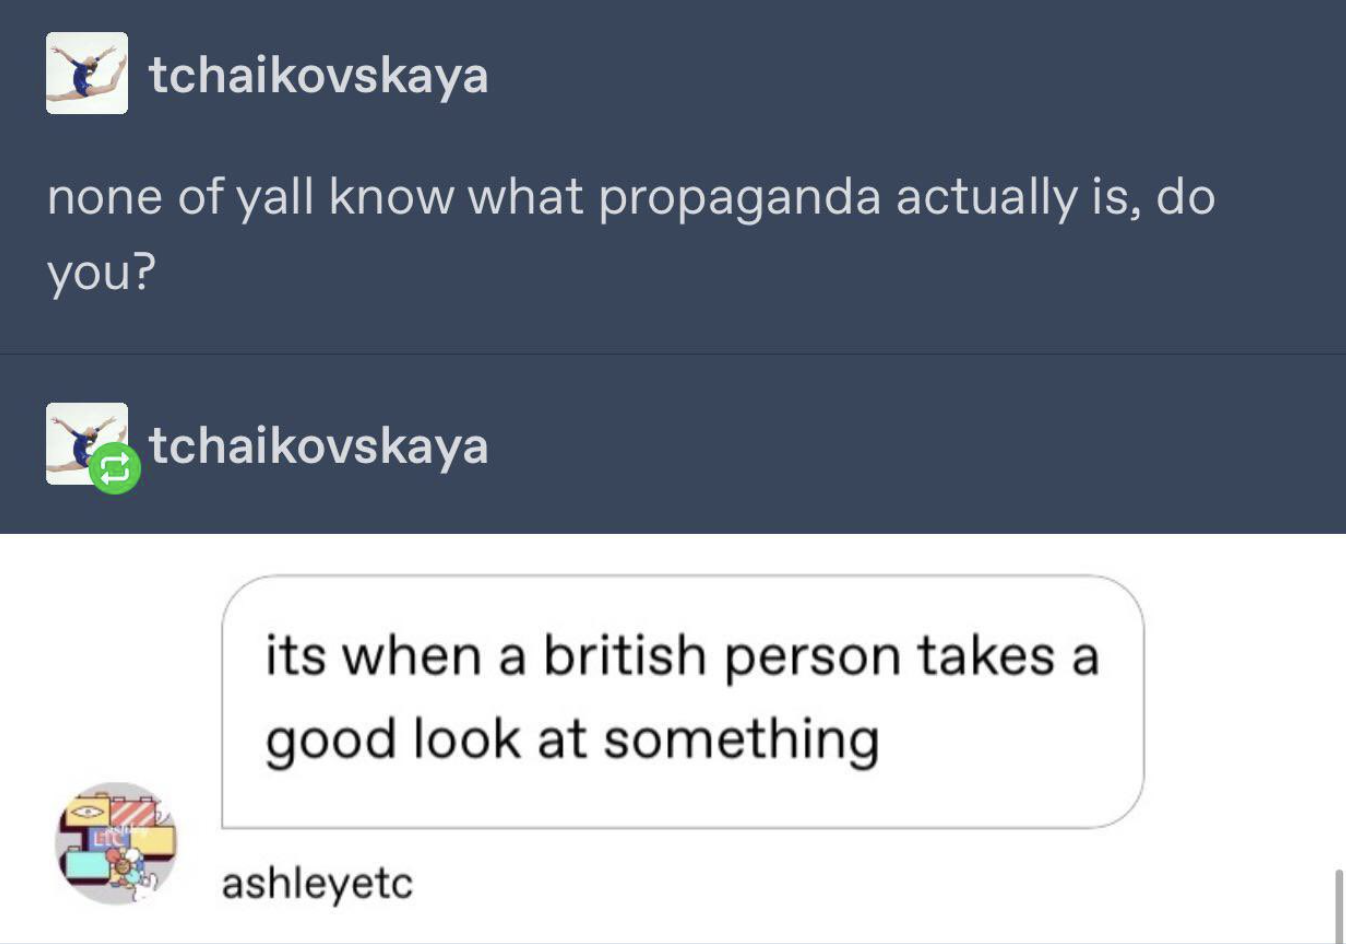 &quot;its when a british person takes a good look at something&quot;